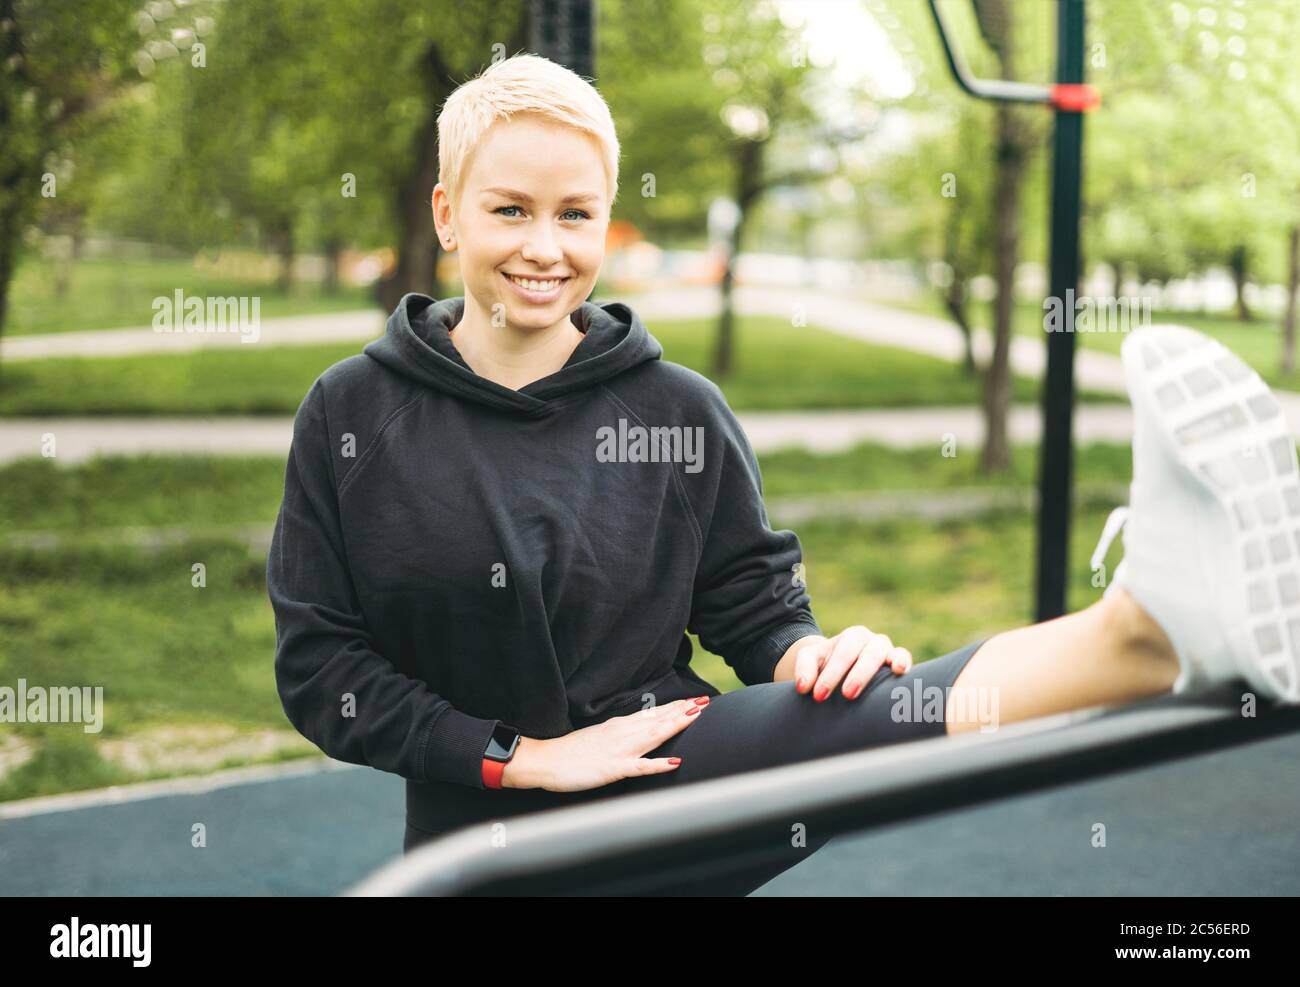 Attractive fit young woman in sport wear stretching on street workout area Stock Photo